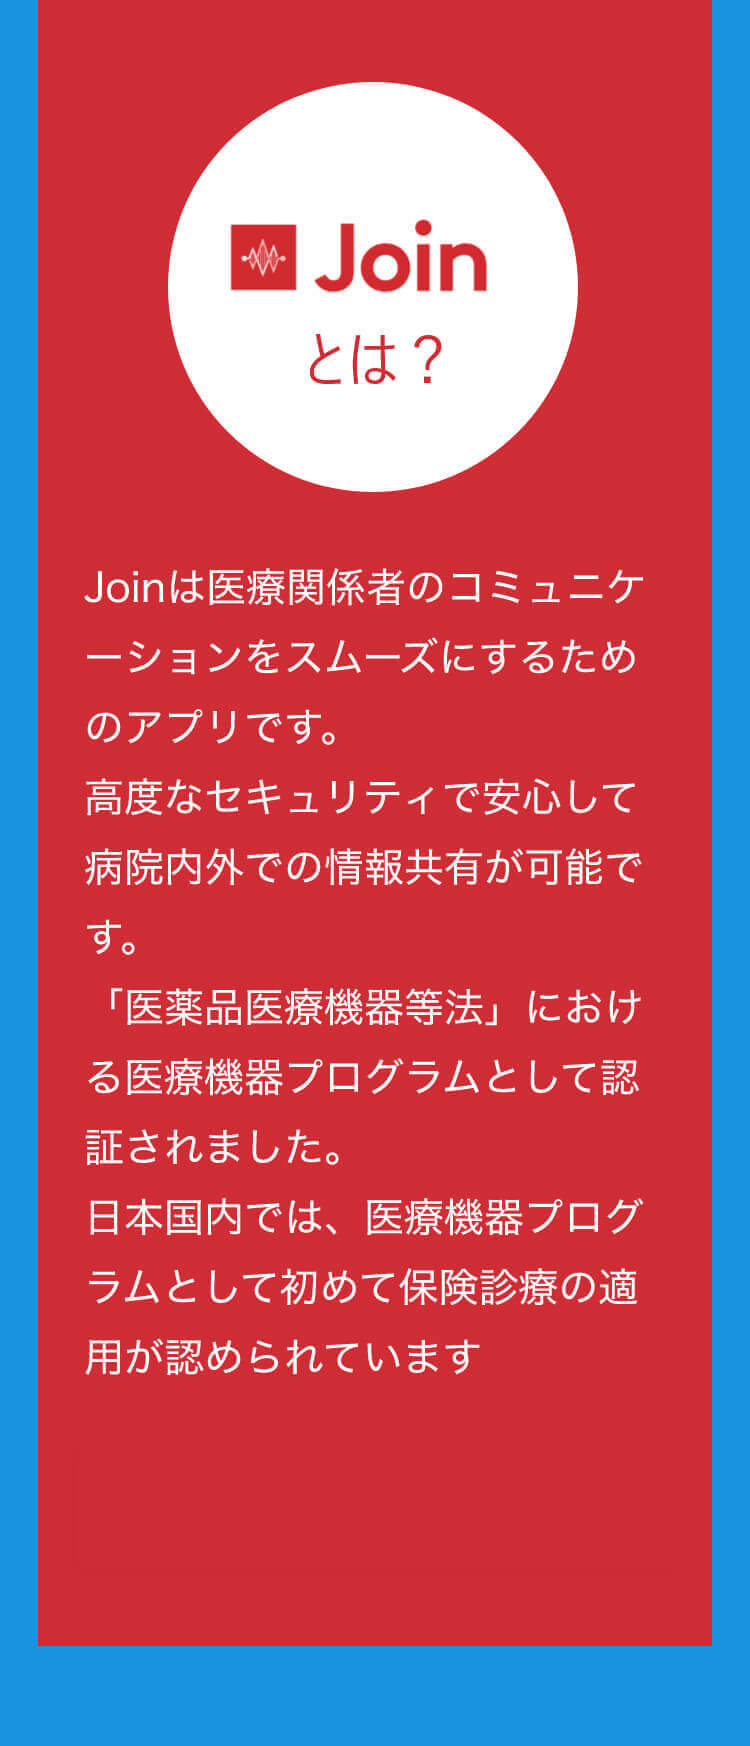 Joinとは？